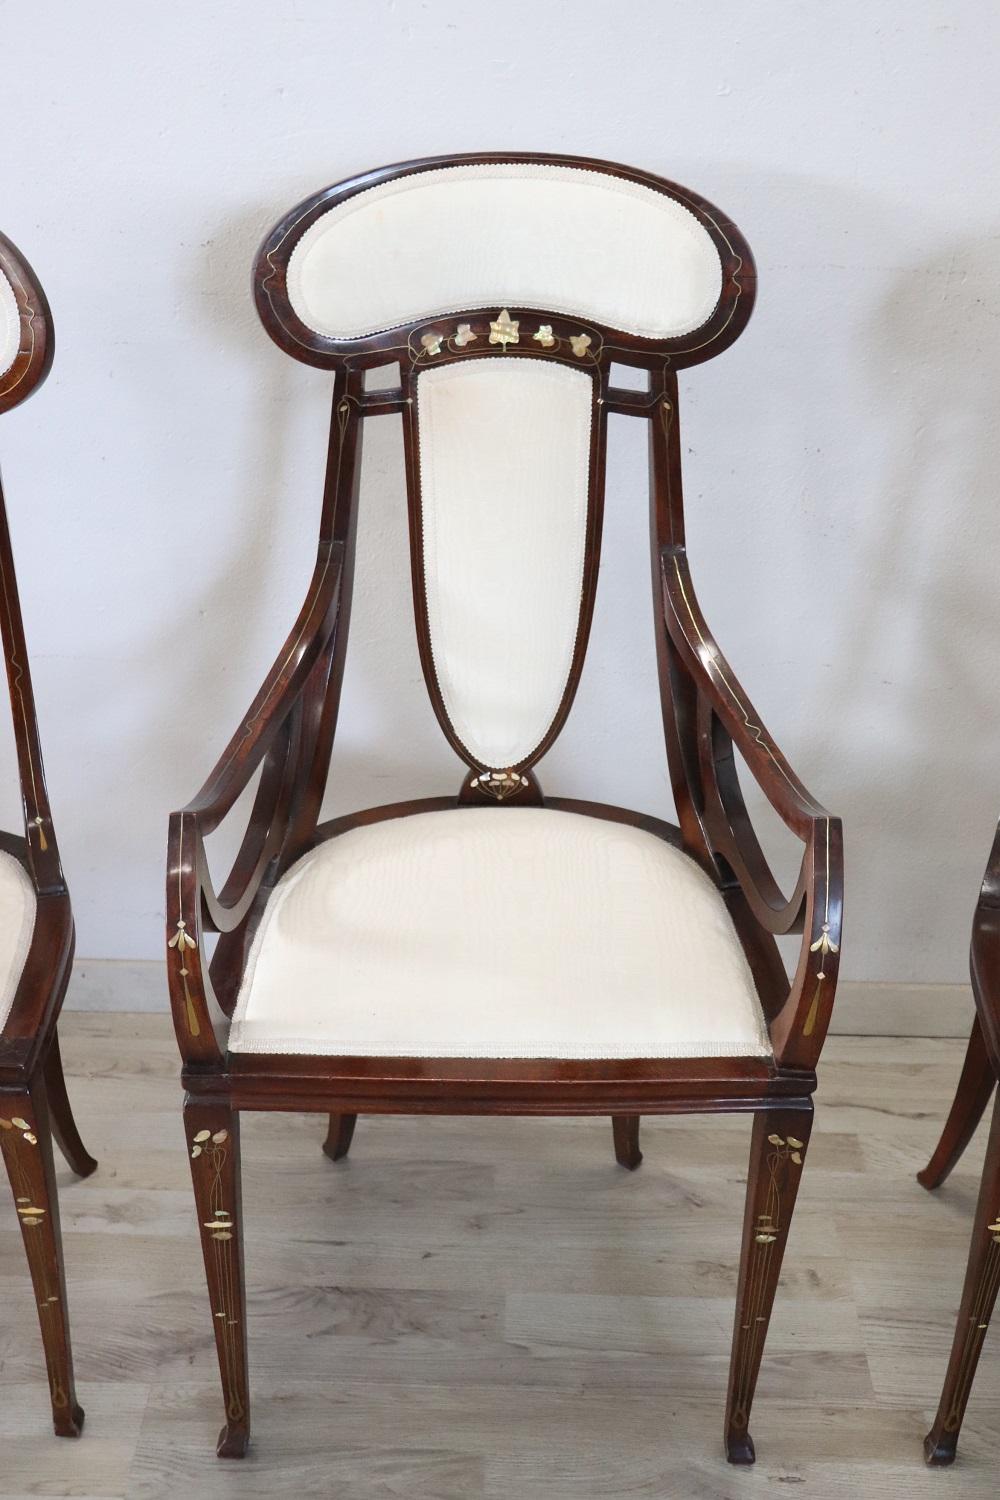 Rare Italian Art Nouveau 1900s set includes:
1 armchair
2 chairs

Very rare chairs and armchair by Carlo Zen, these chairs are made of Walnut inlaid with mother of Pearl and brass and are still lined with the original silk fabric. At the turn of the